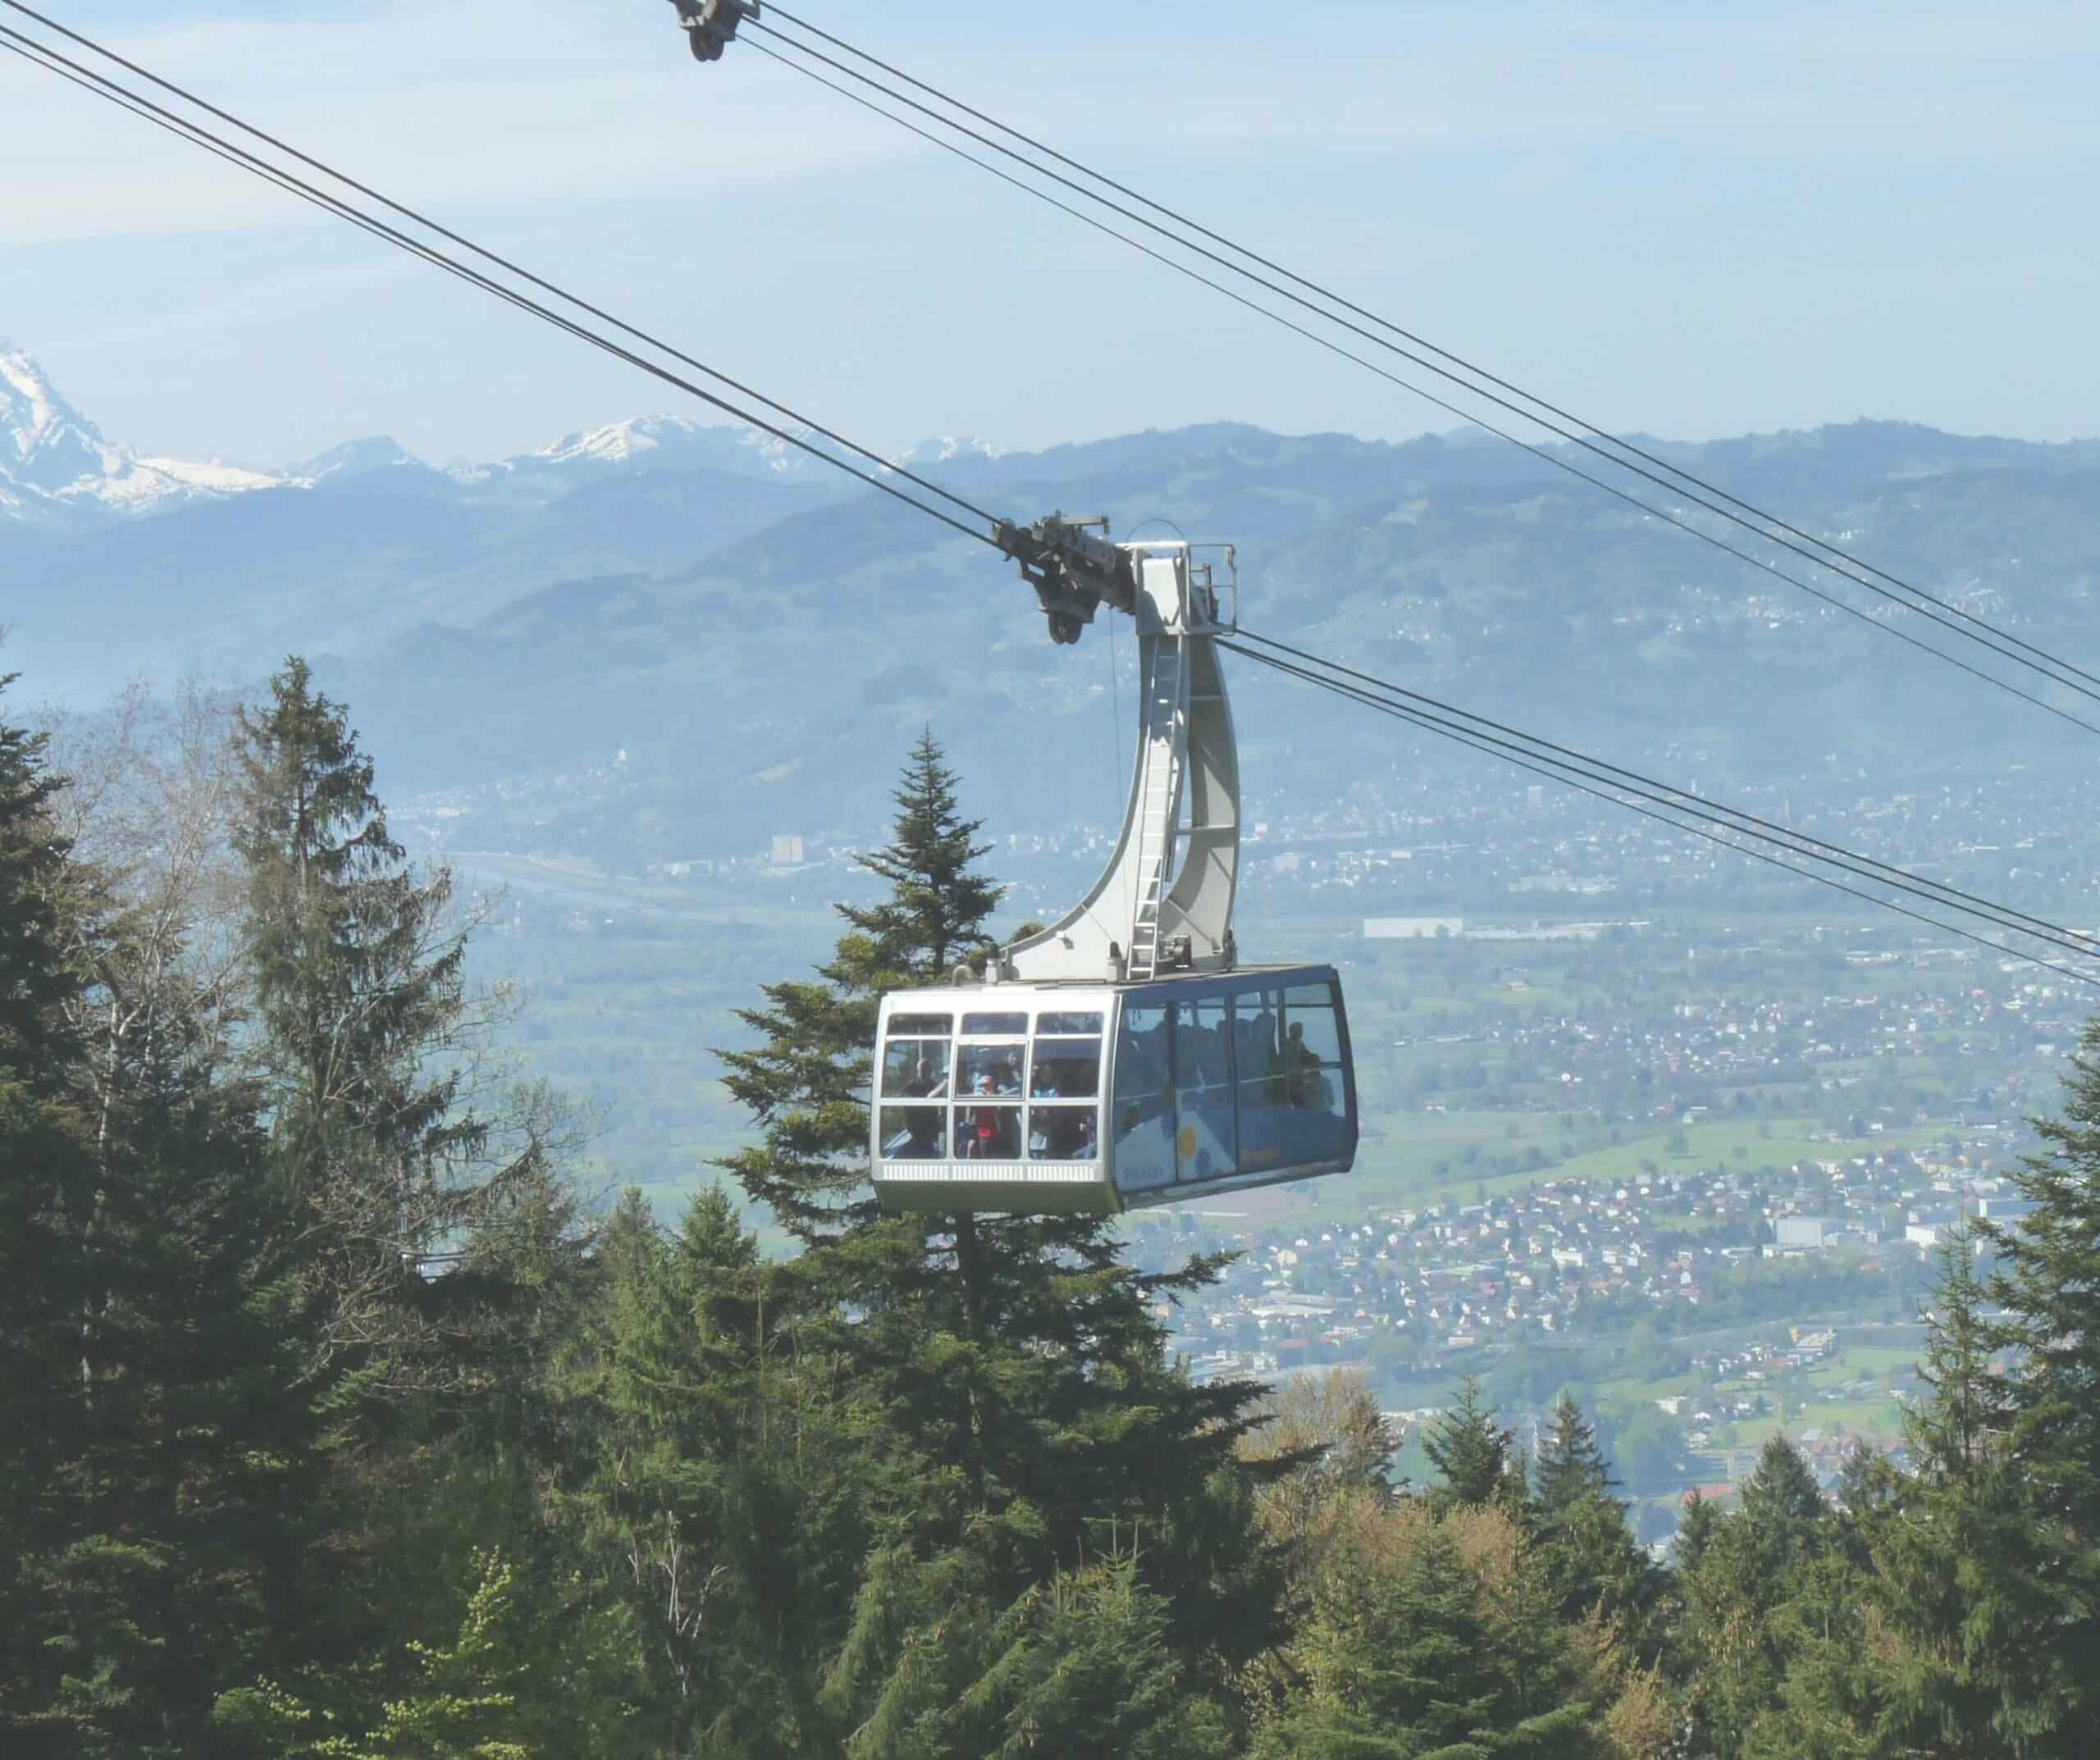 Mountain Scenery & Gondola Ride with Lunch